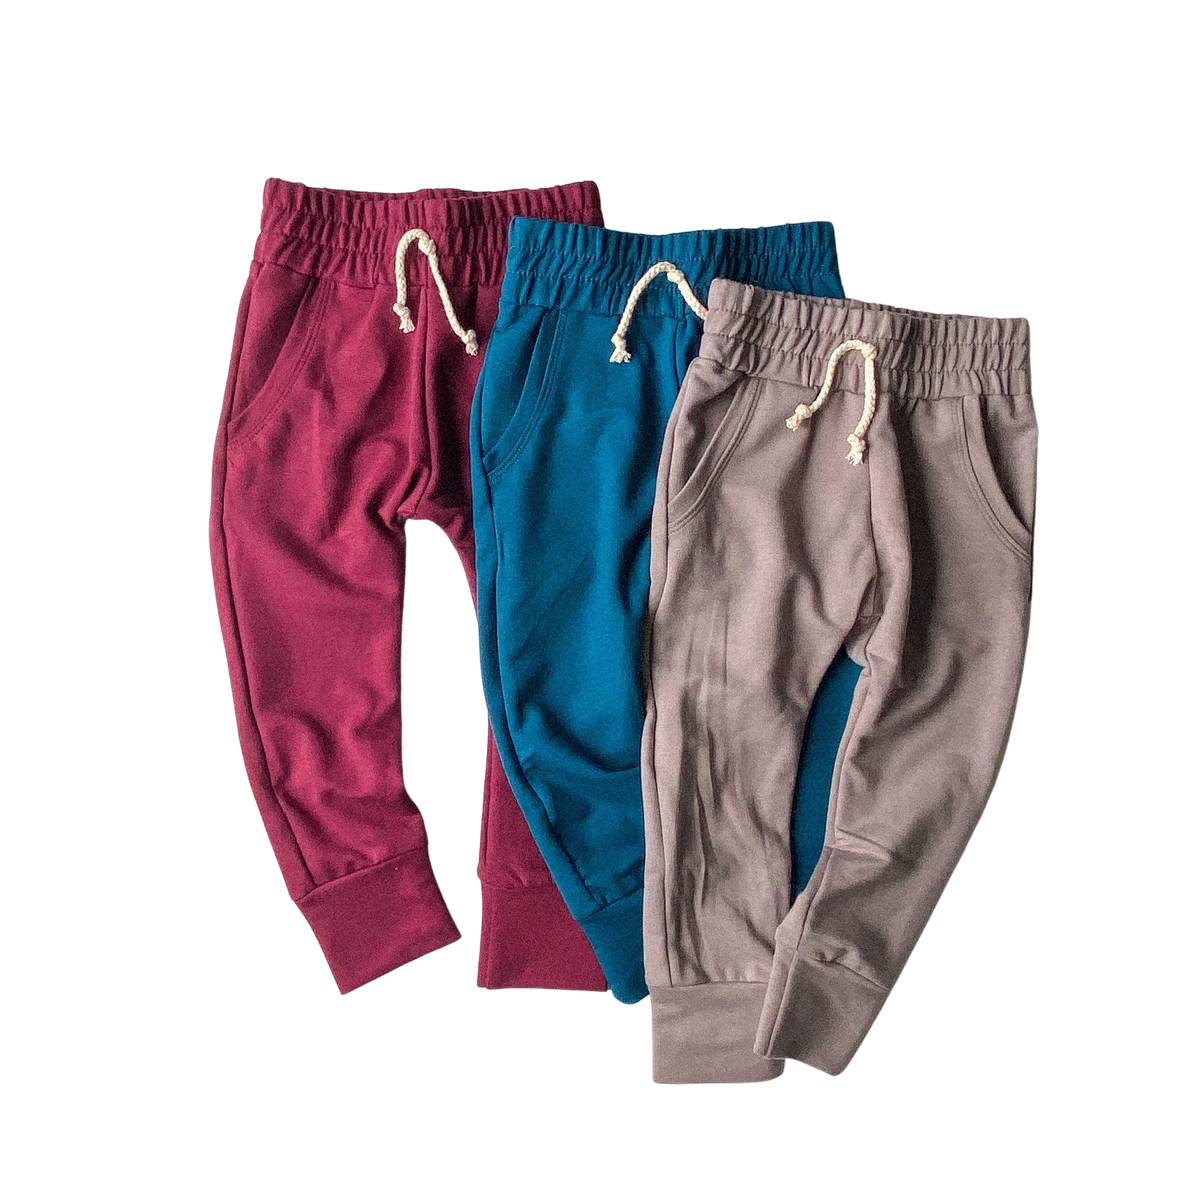 Jude Joggers in 'Crushed Berry' - Ready To Ship